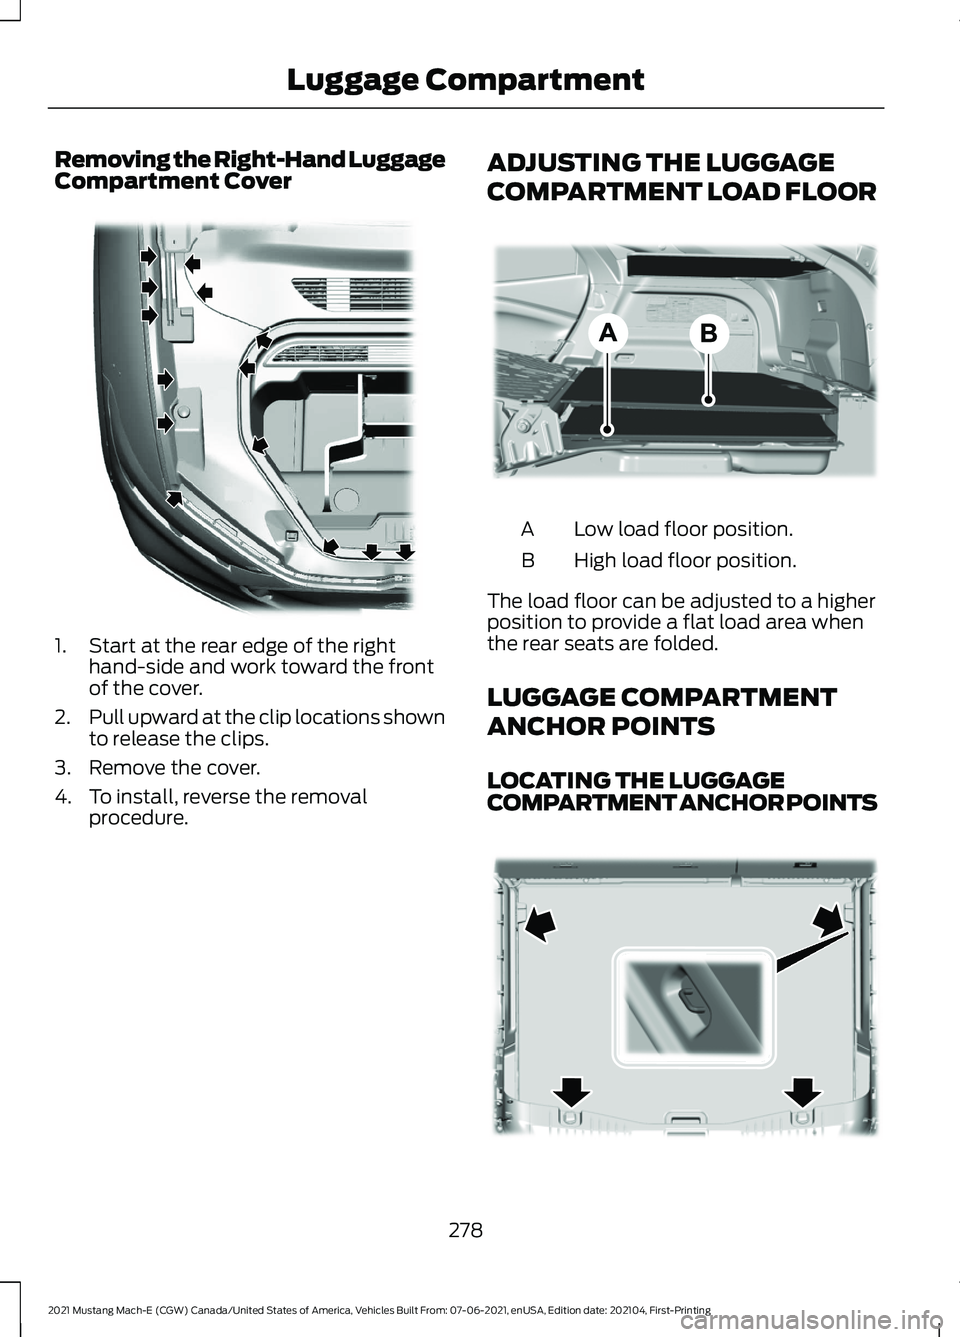 FORD MUSTANG MACH-E 2021  Owners Manual Removing the Right-Hand Luggage
Compartment Cover
1. Start at the rear edge of the right
hand-side and work toward the front
of the cover.
2. Pull upward at the clip locations shown
to release the cli